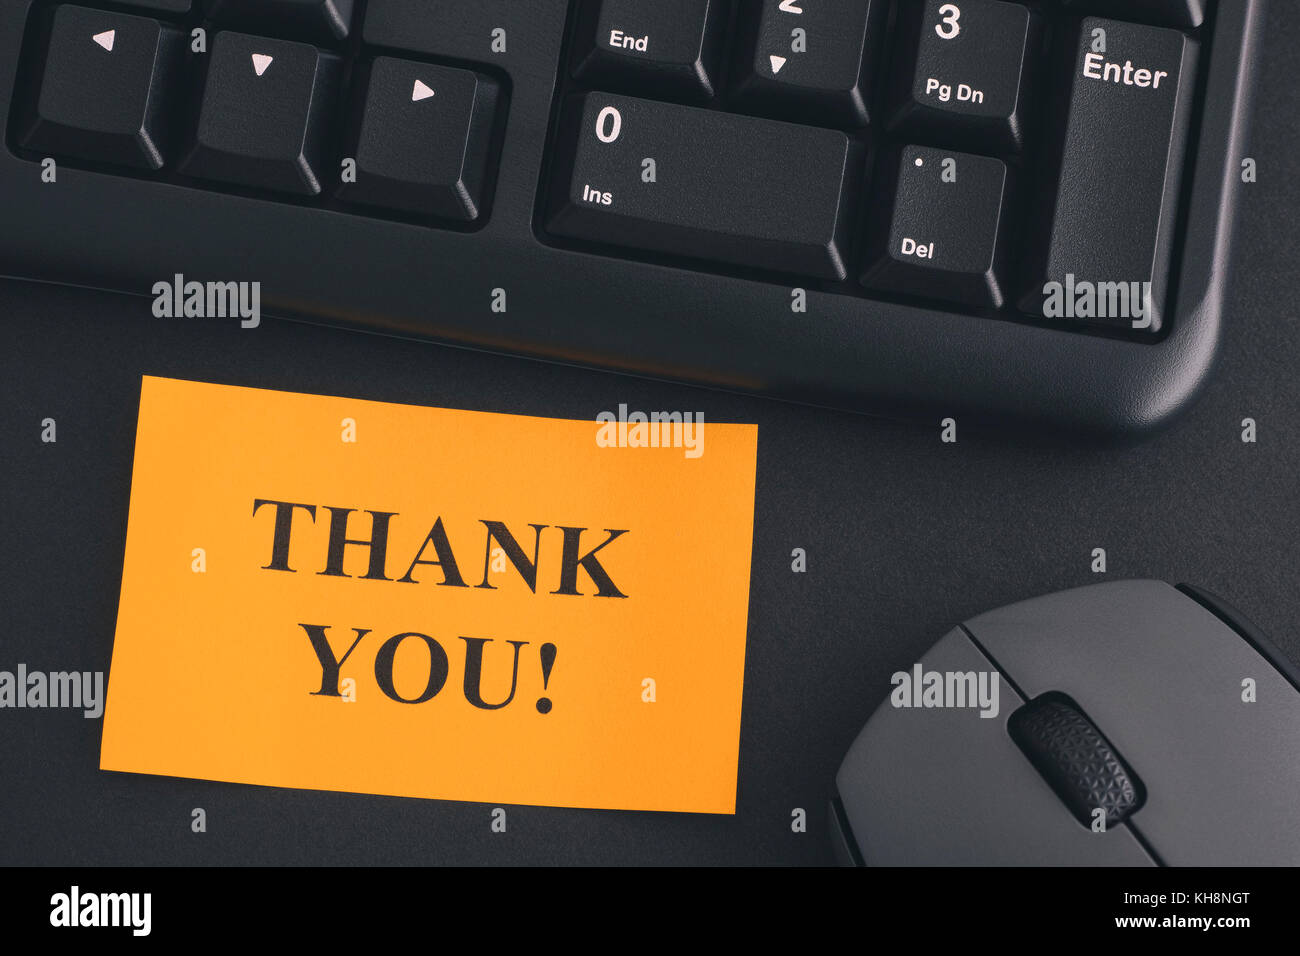 Thank You!. Paper note with writing Thank You! on a desk with black keyboard and grey wireless mouse. Close up. Stock Photo